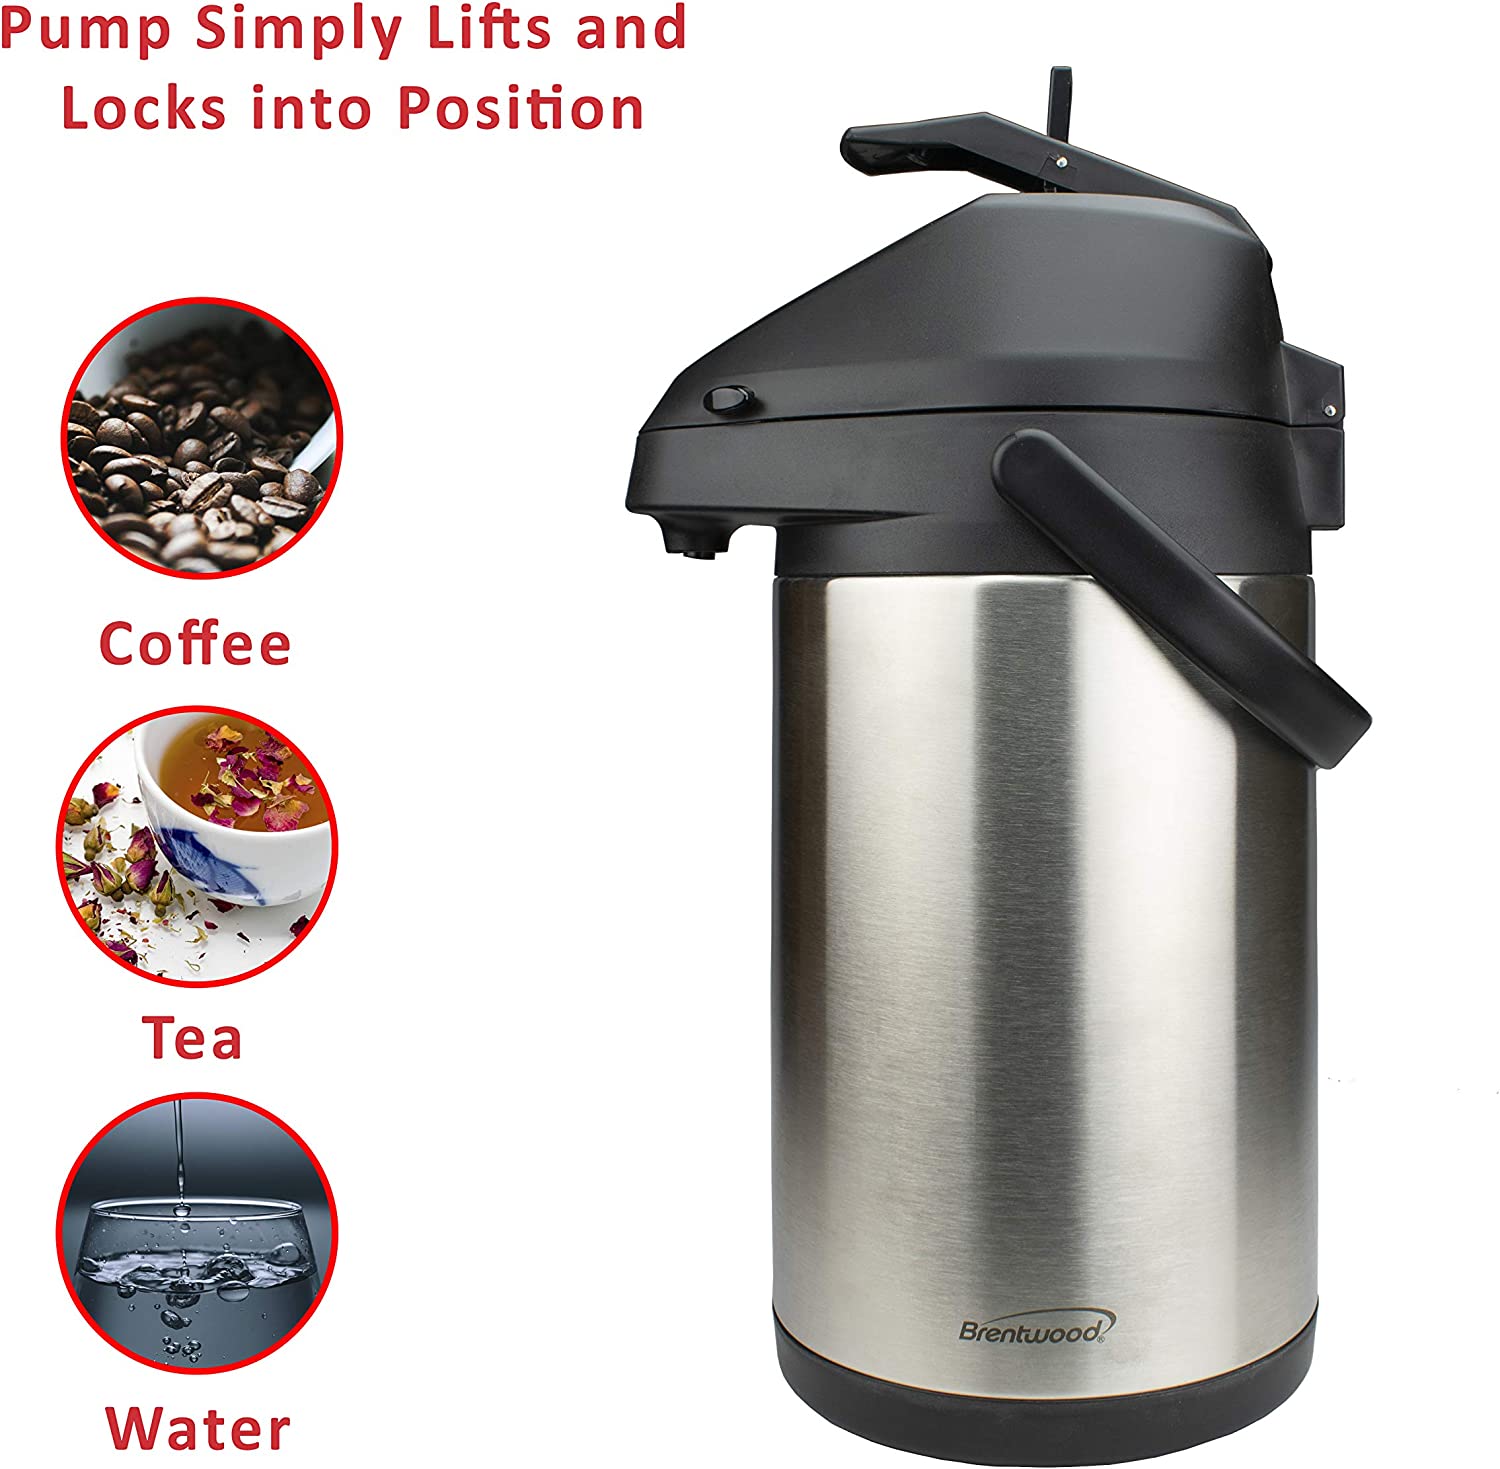 Brentwood 3.5-Liter Airpot Hot &amp; Cold Drink Dispenser, Stainless Steel, Black